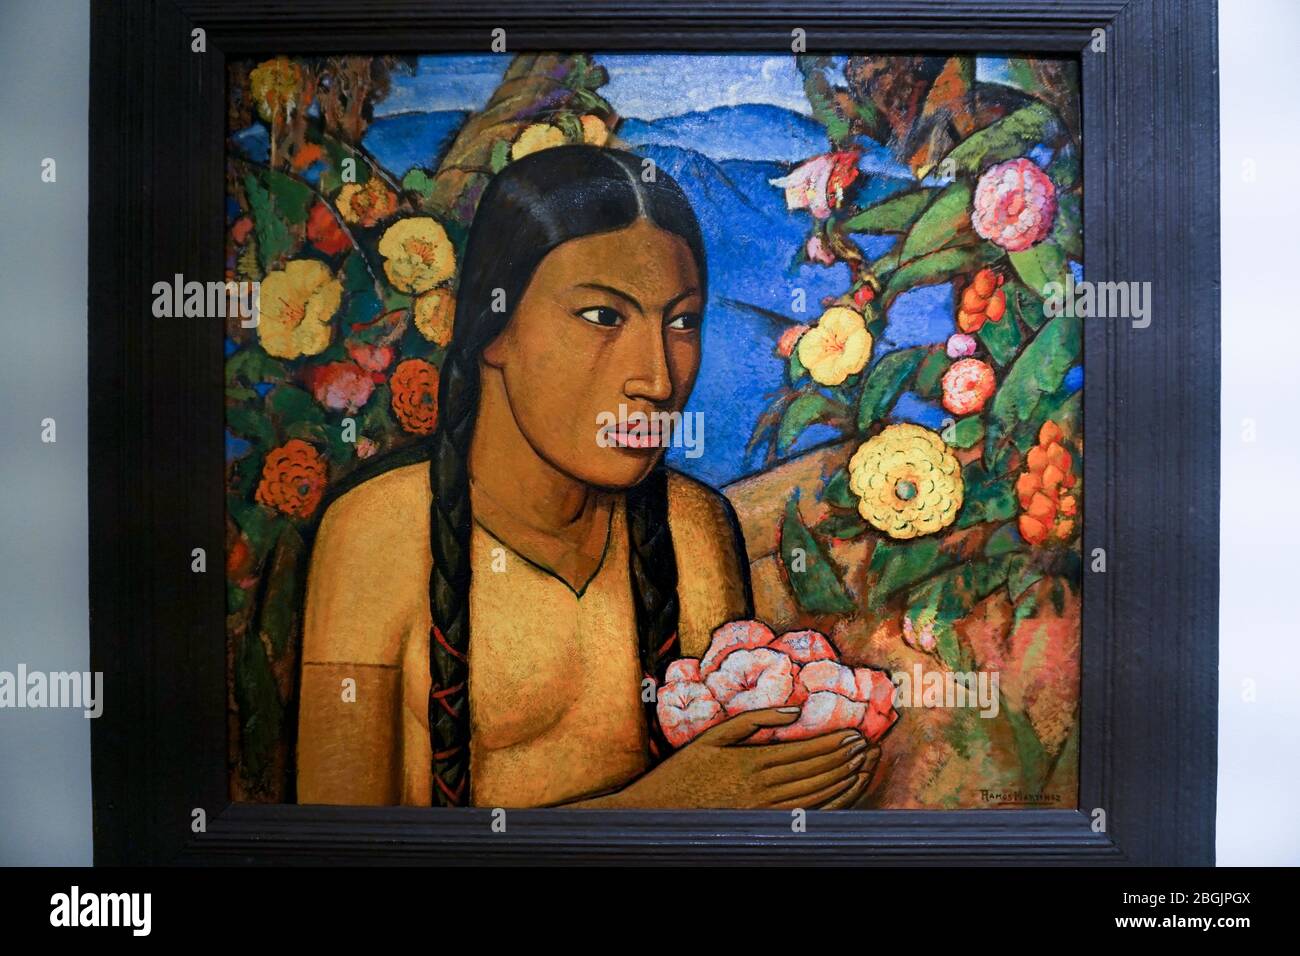 'Juanita Among the Flowers' oil on paper by Alfredo Ramos Martinez, in the  Soumaya Museum (Museo Soumaya) in Mexico City, Mexico. Stock Photo